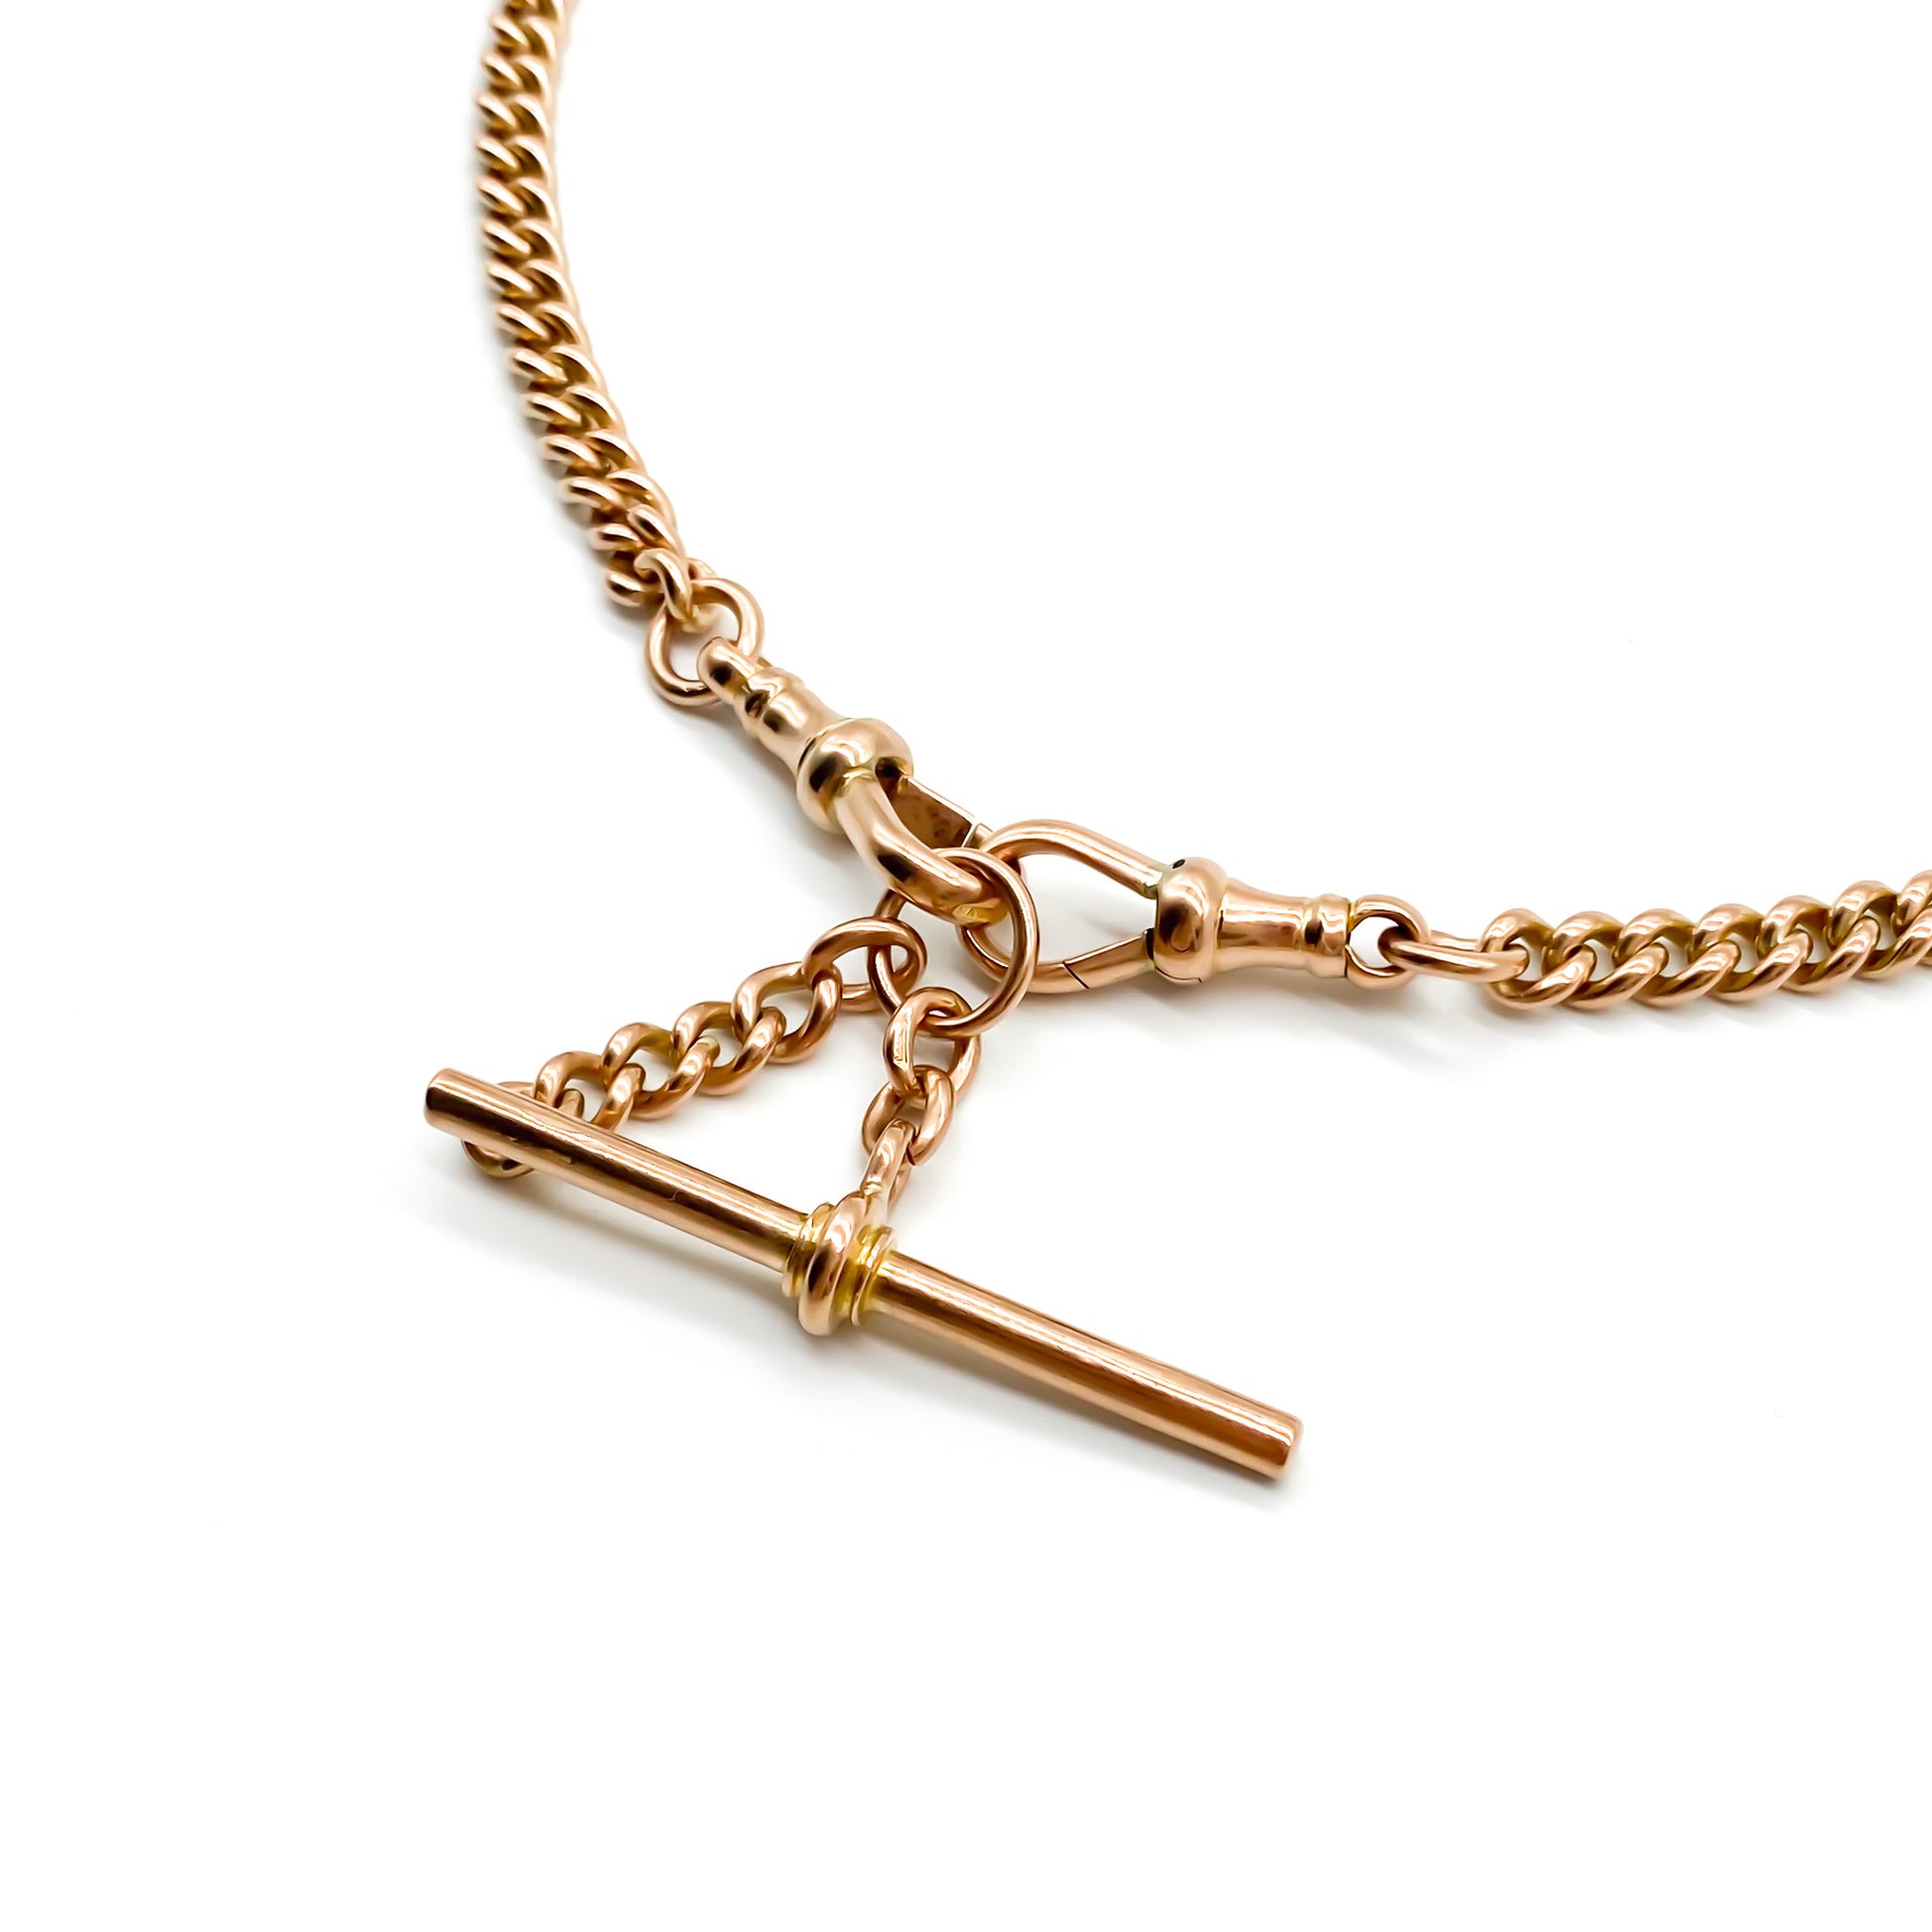 Classic Victorian 9ct rose gold fob chain with two dog-clips and a t-bar. Every link is stamped.